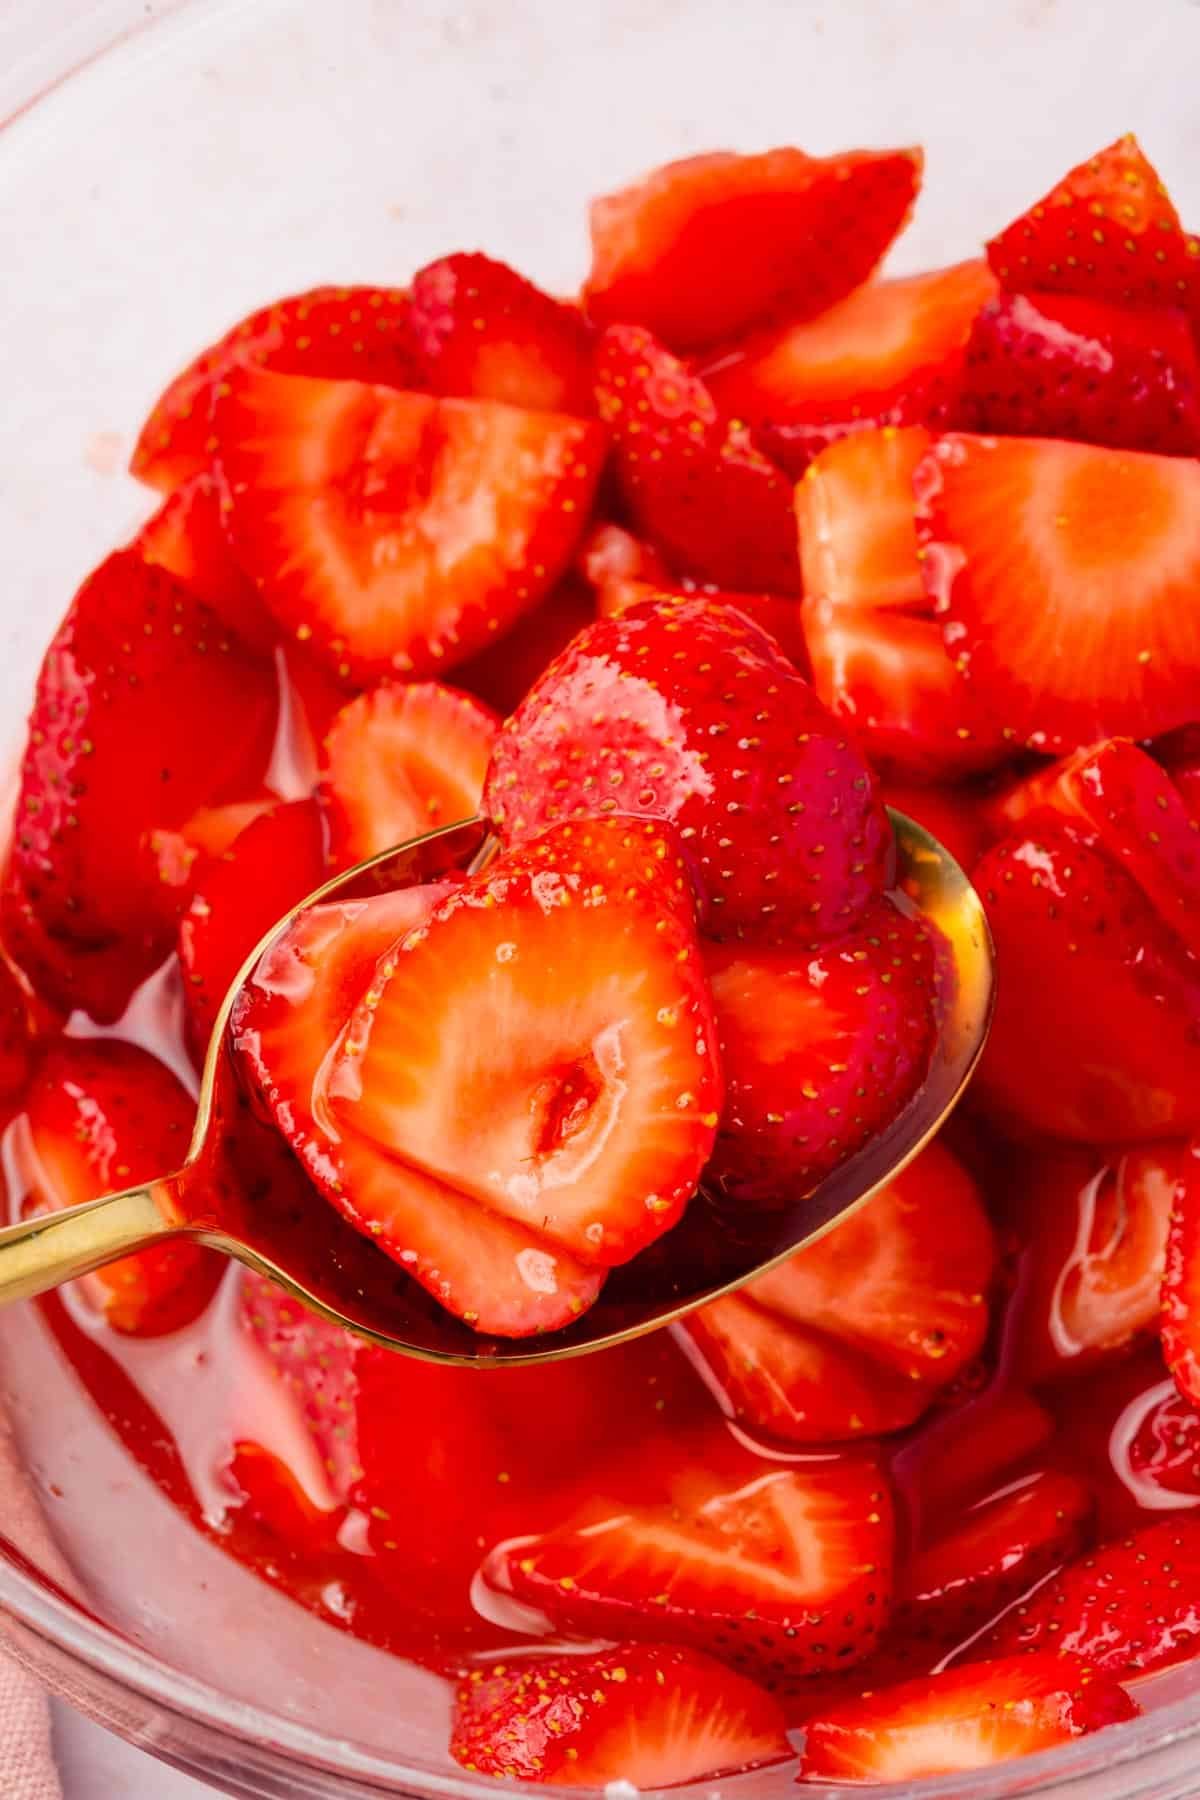 A spoon scooping out macerated strawberries from a larger bowl.